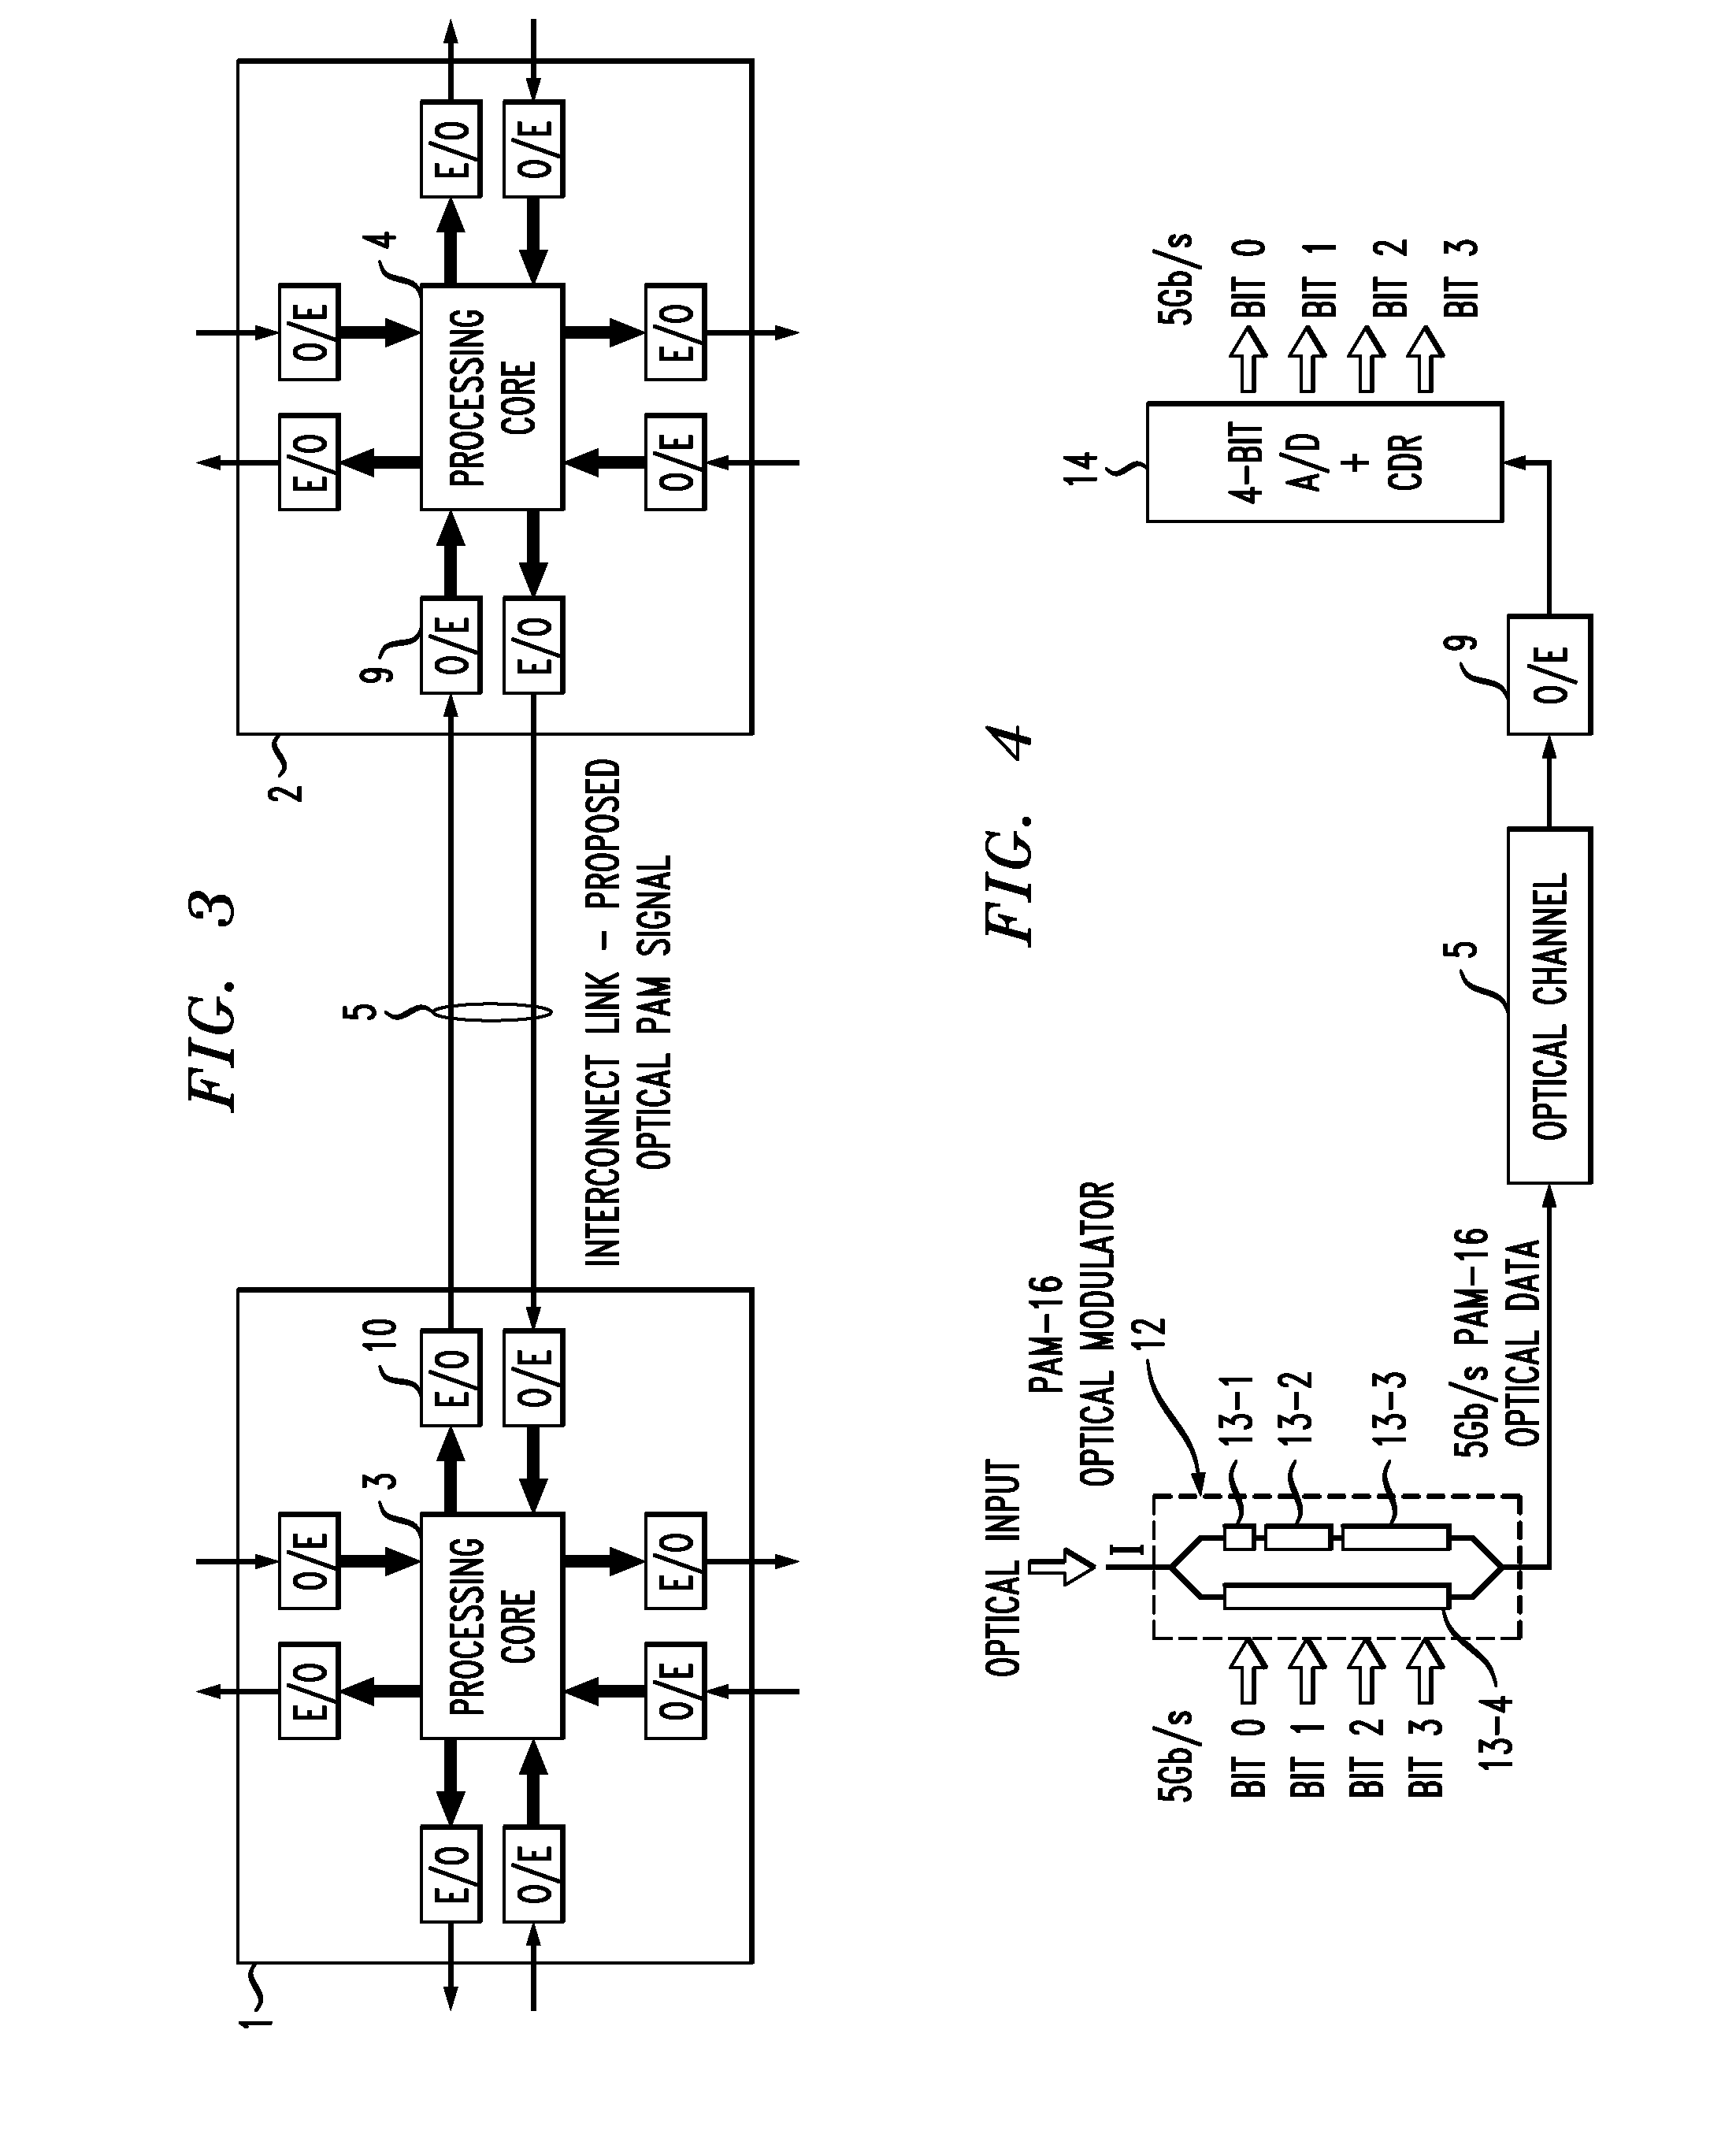 Optical Interconnection Arrangement For High Speed, High Density Communication Systems